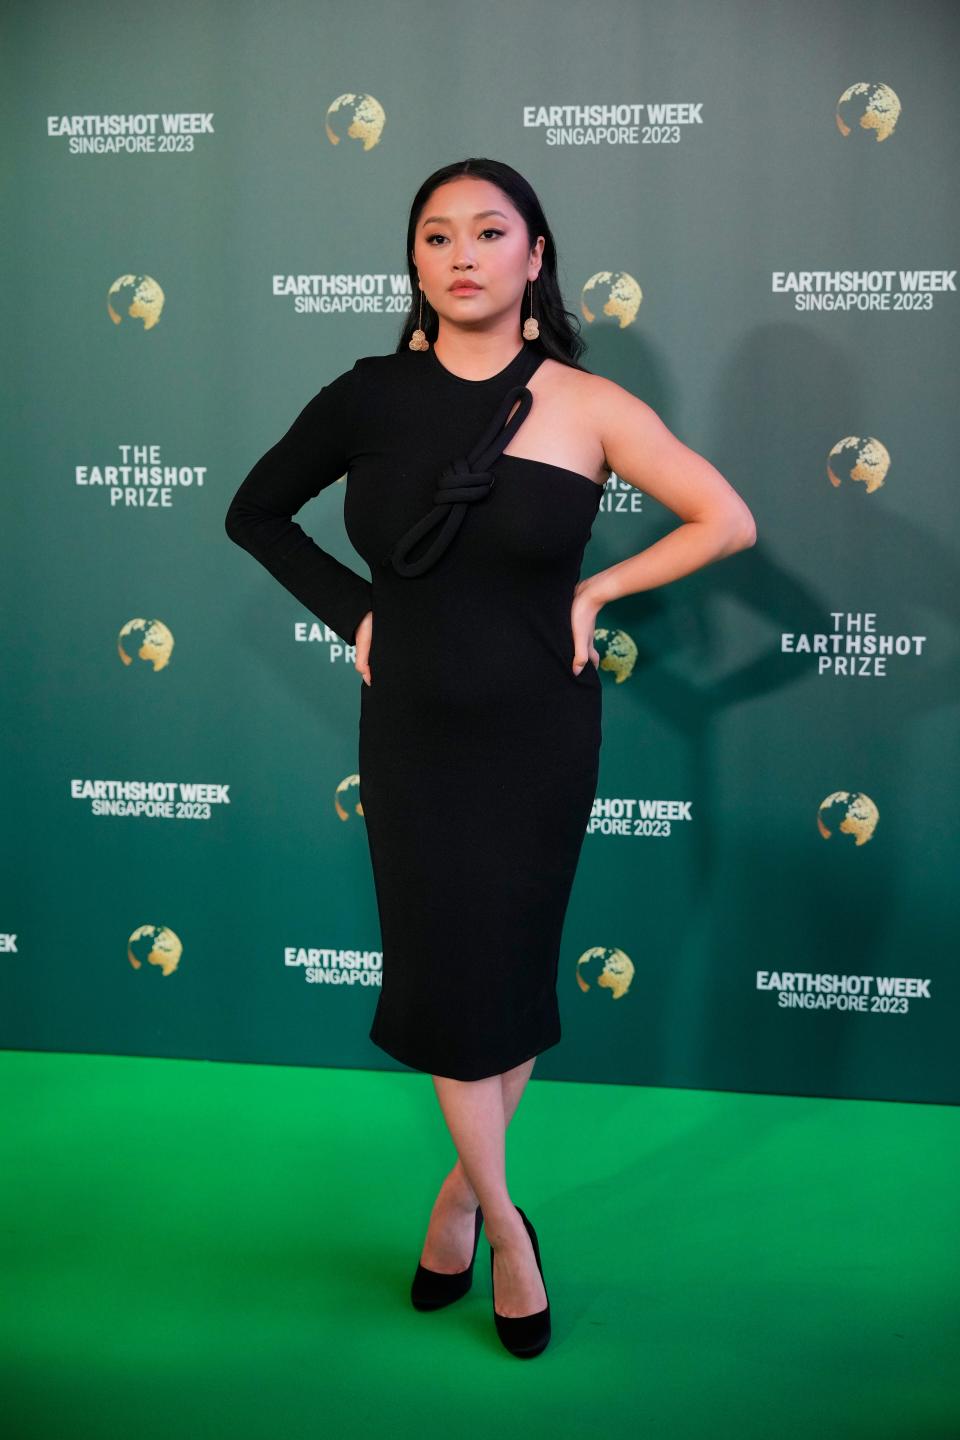 Lana Condor poses for photographer on the green carpet for the Earthshot Prize Awards.